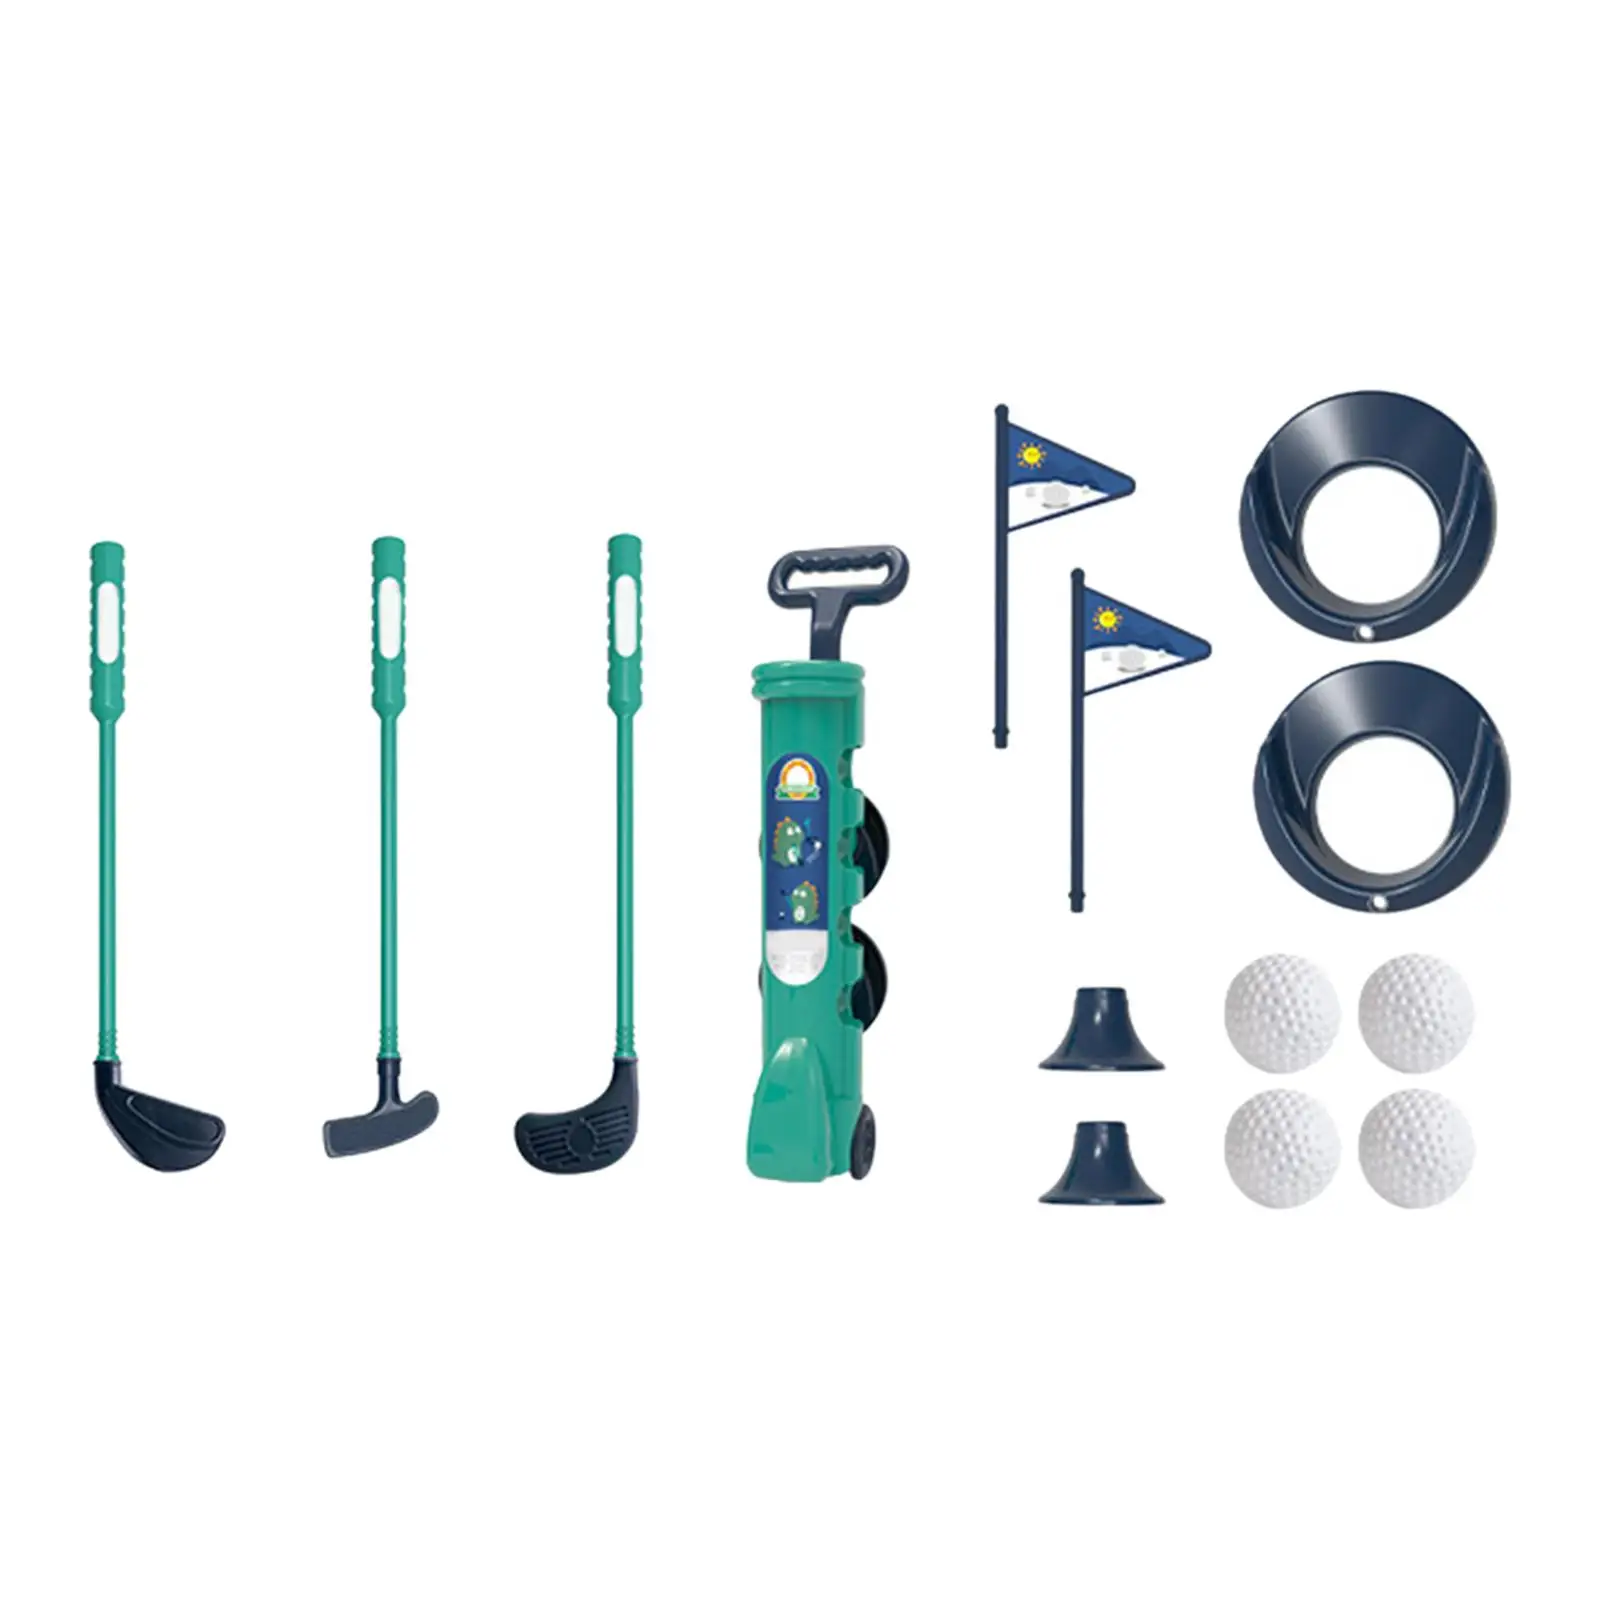 Practicing Kid Golf Practice Game Play Set Outdoors Exercise Toys Funny golf club Set for Indoor Outdoor Lawn Birthday Gift